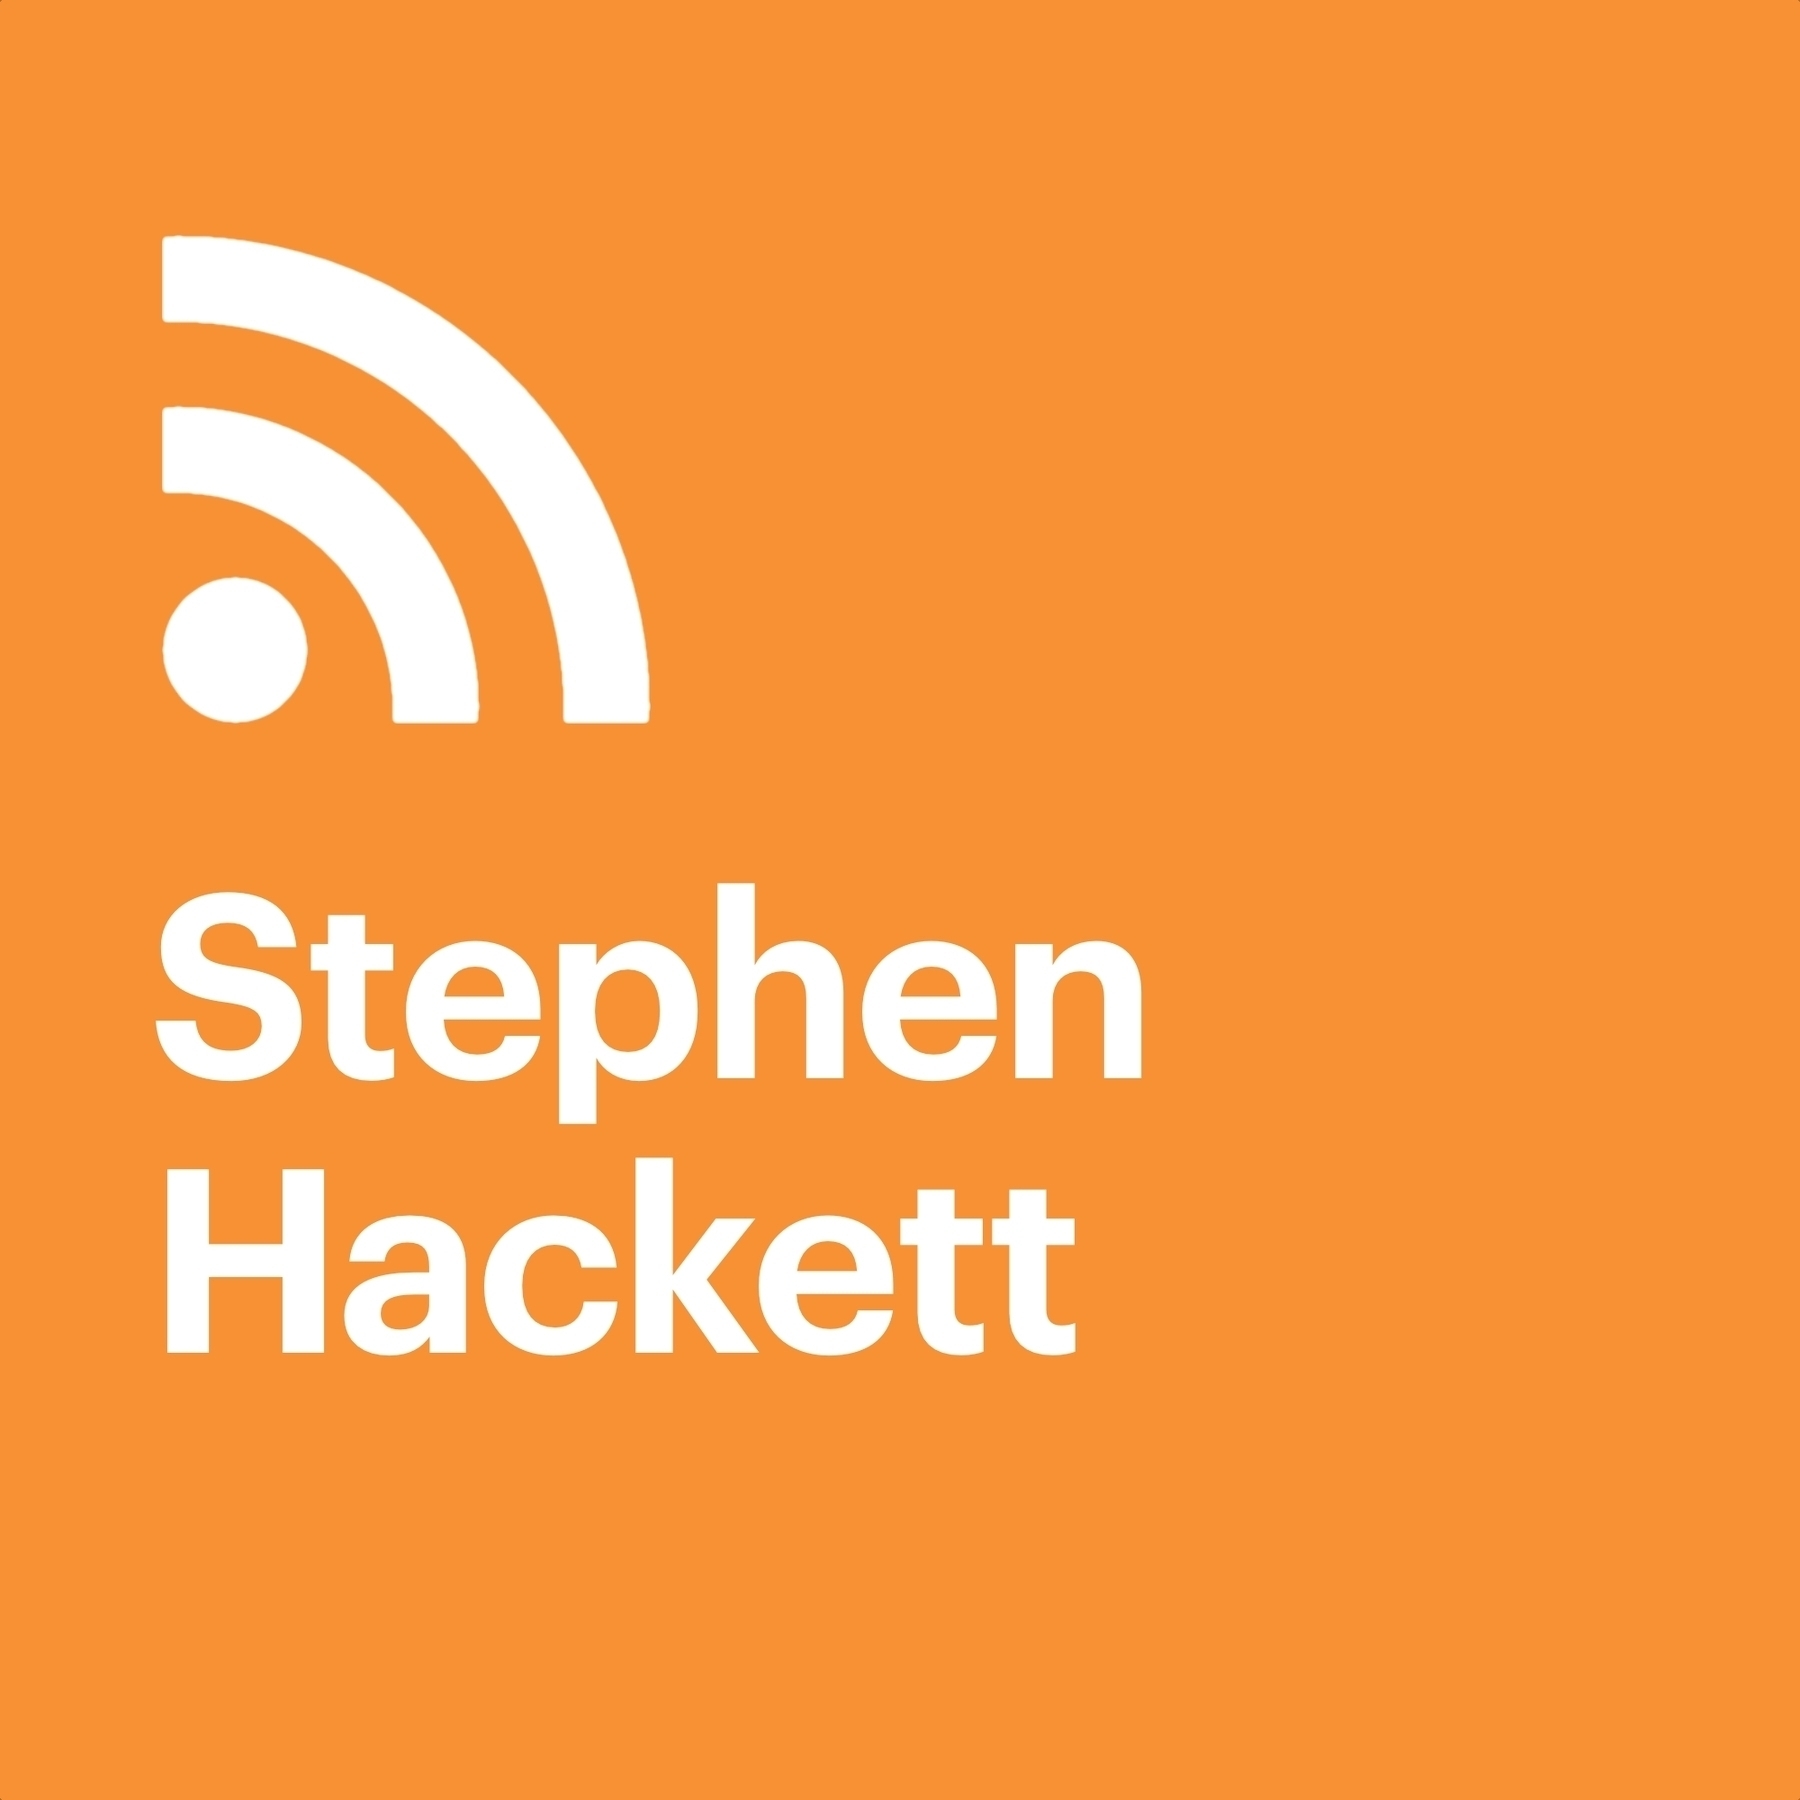 An RSS icon with the name Stephen Hackett underneath it